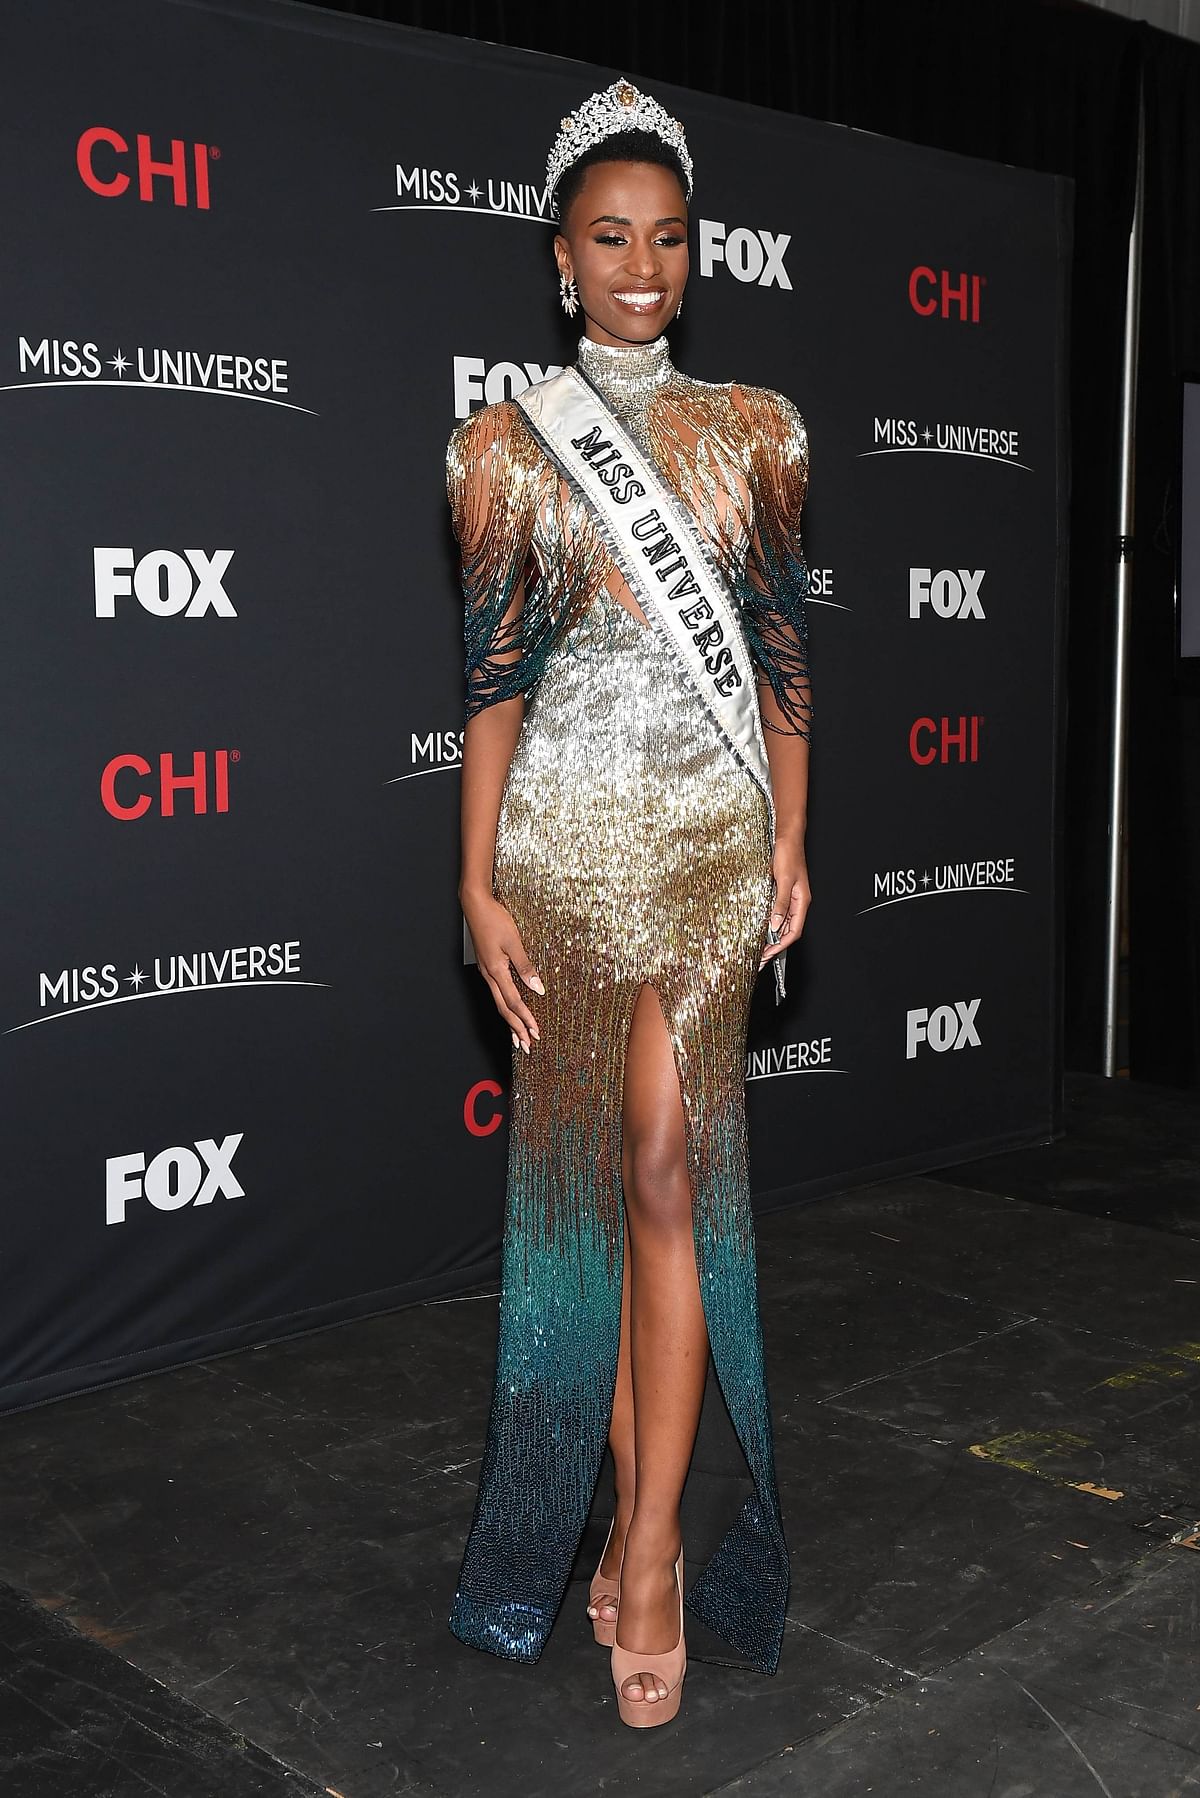 Miss Universe 2019 Zozibini Tunzi, of South Africa, appears at a press conference following the 2019 Miss Universe Pageant at Tyler Perry Studios on 8 December in Atlanta, Georgia. Photo: AFP